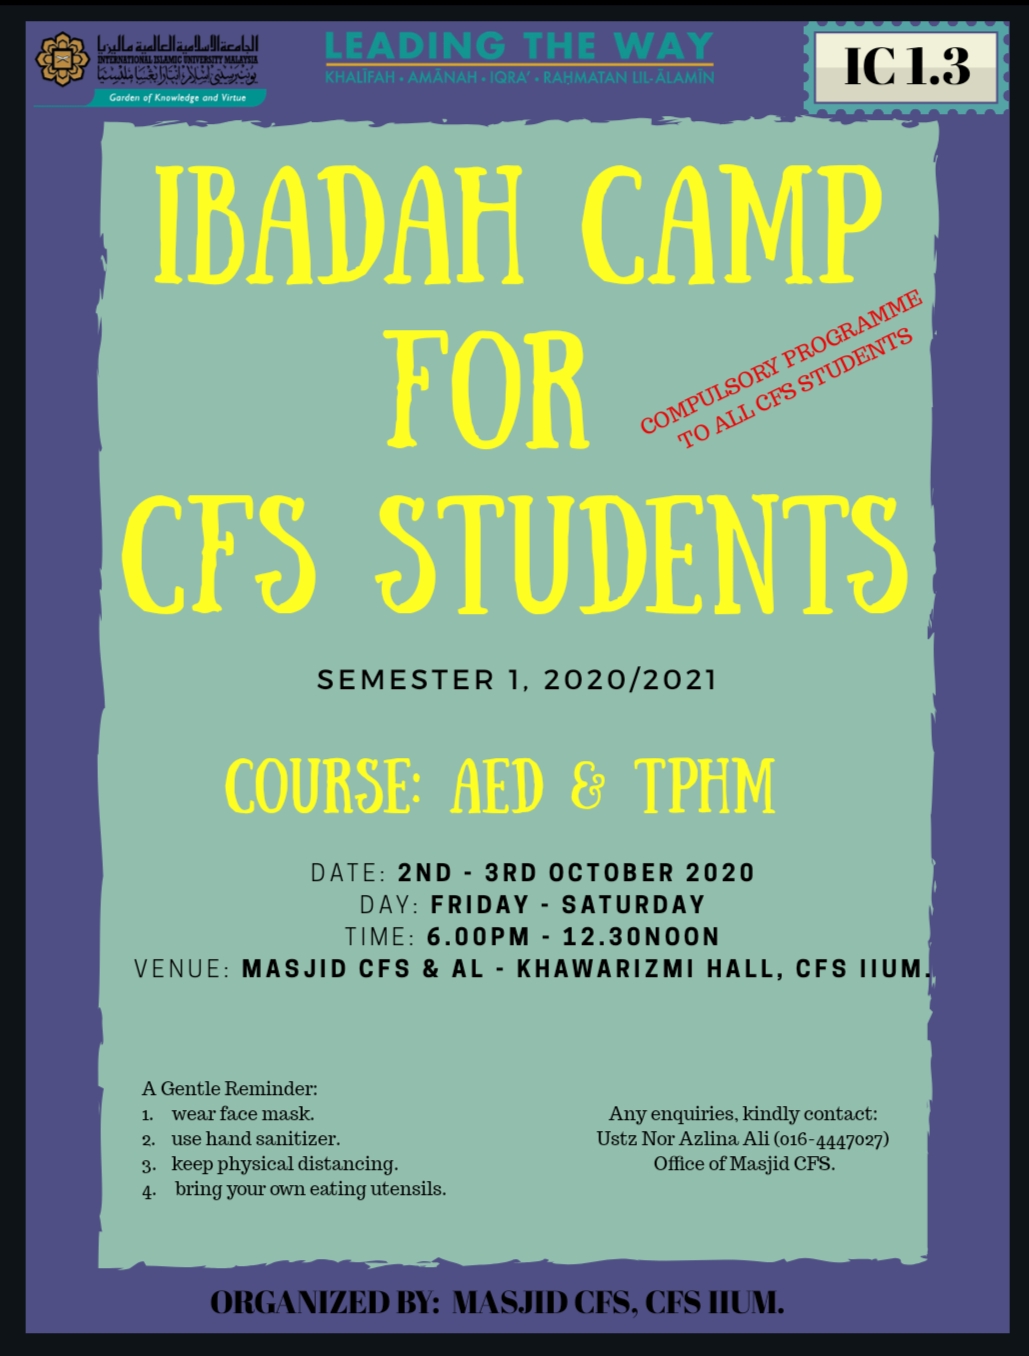 IBADAH CAMP FOR CFS STUDENTS (AED & TPHM)